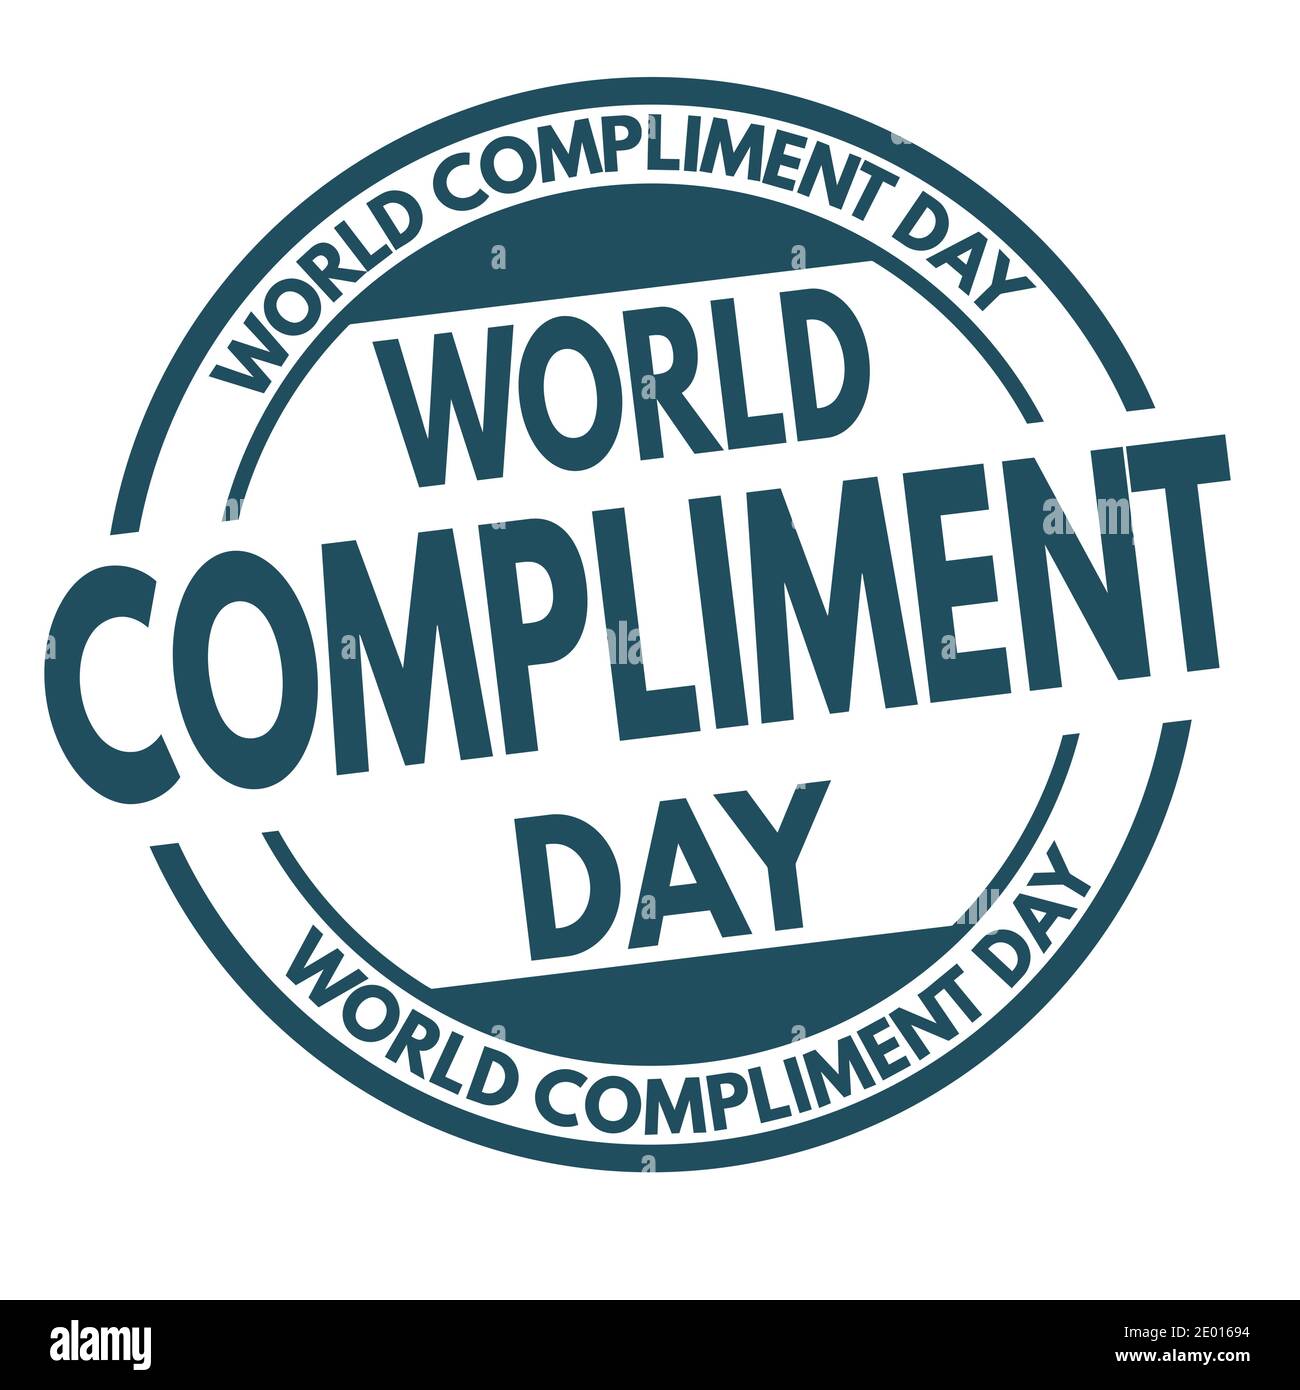 World compliment day sign or stamp on white background, vector